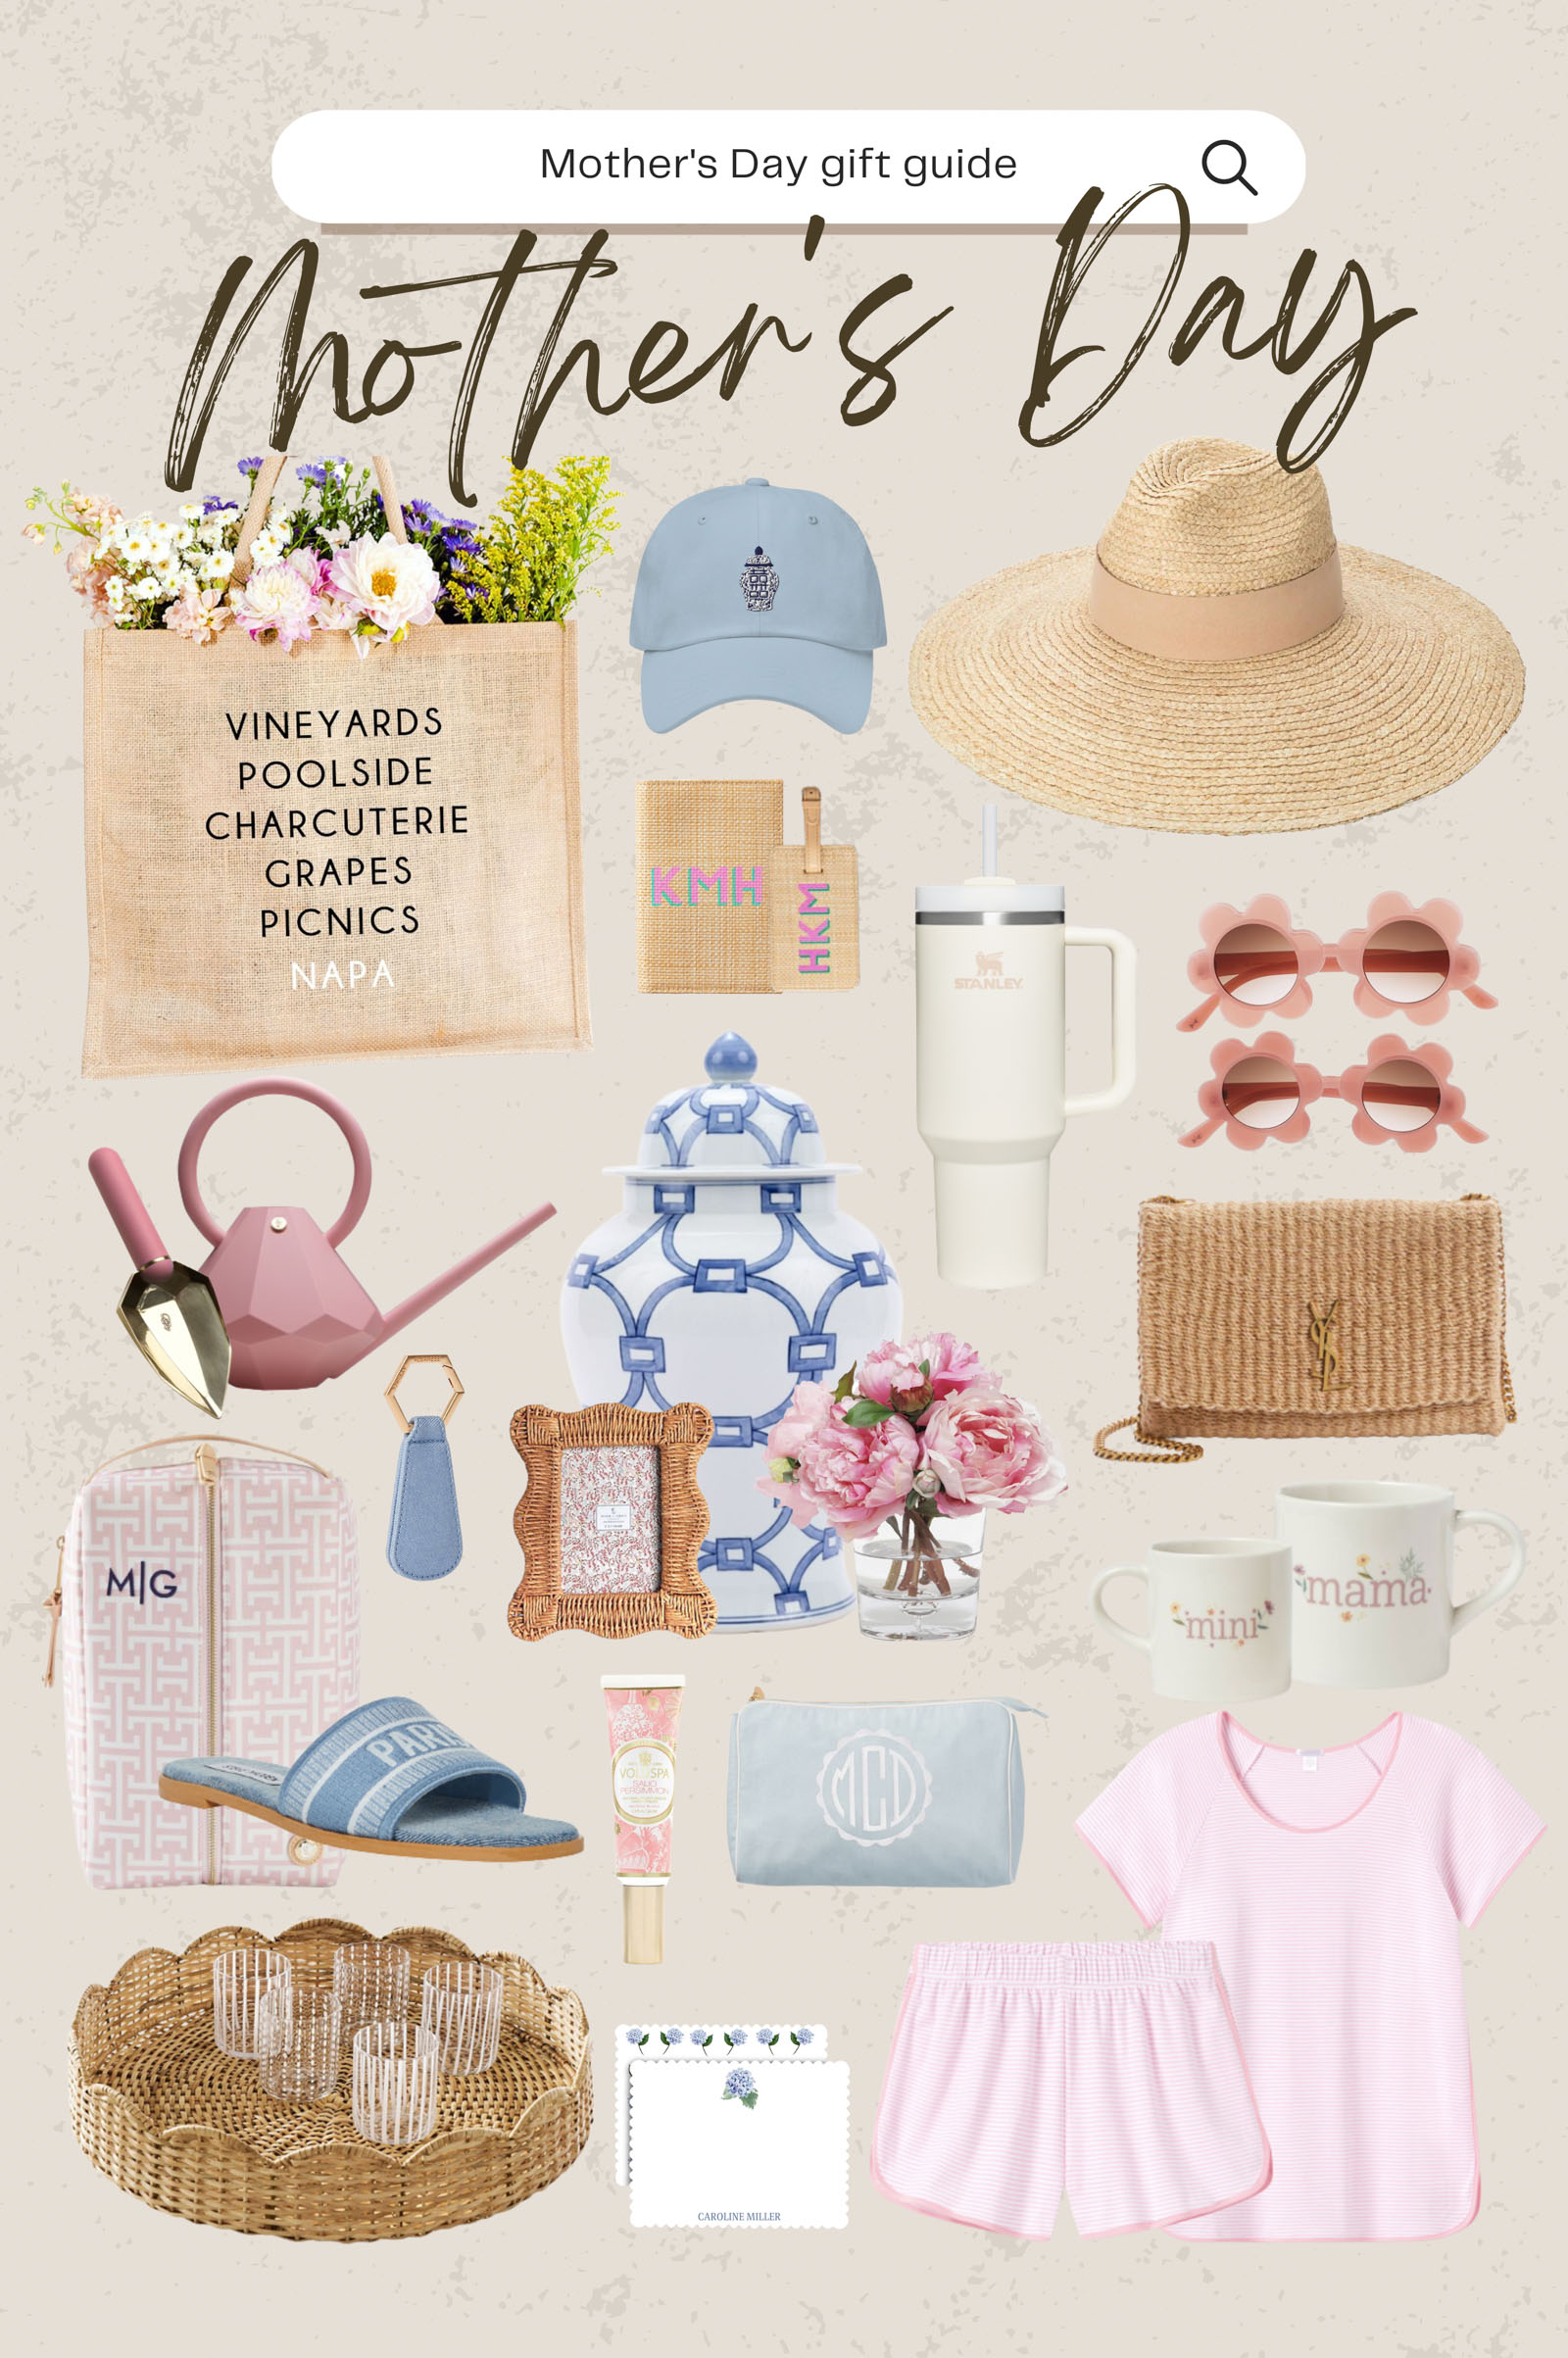 Mother's Day Gift Guide - New Darlings